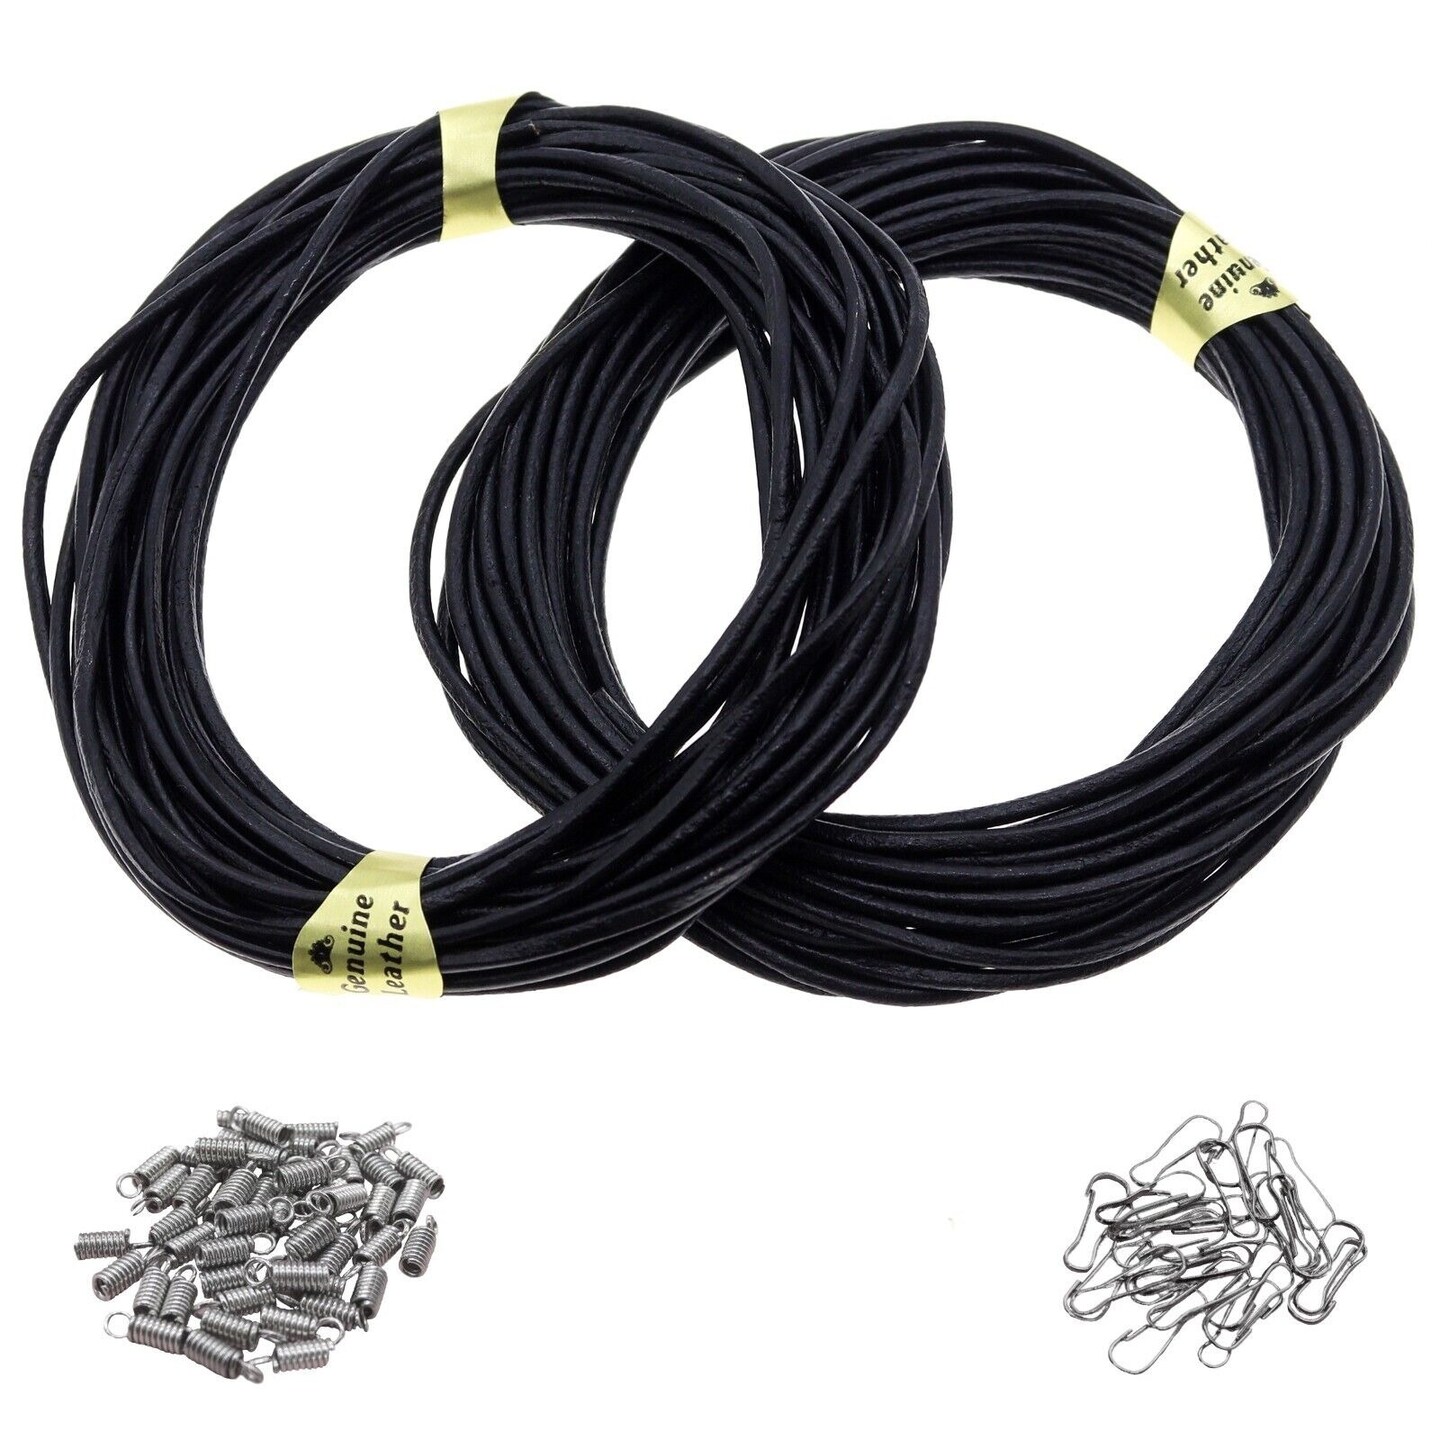 10 Meters Genuine Leather Cord for Jewelry Making and 124 PCS Jewelry Findings